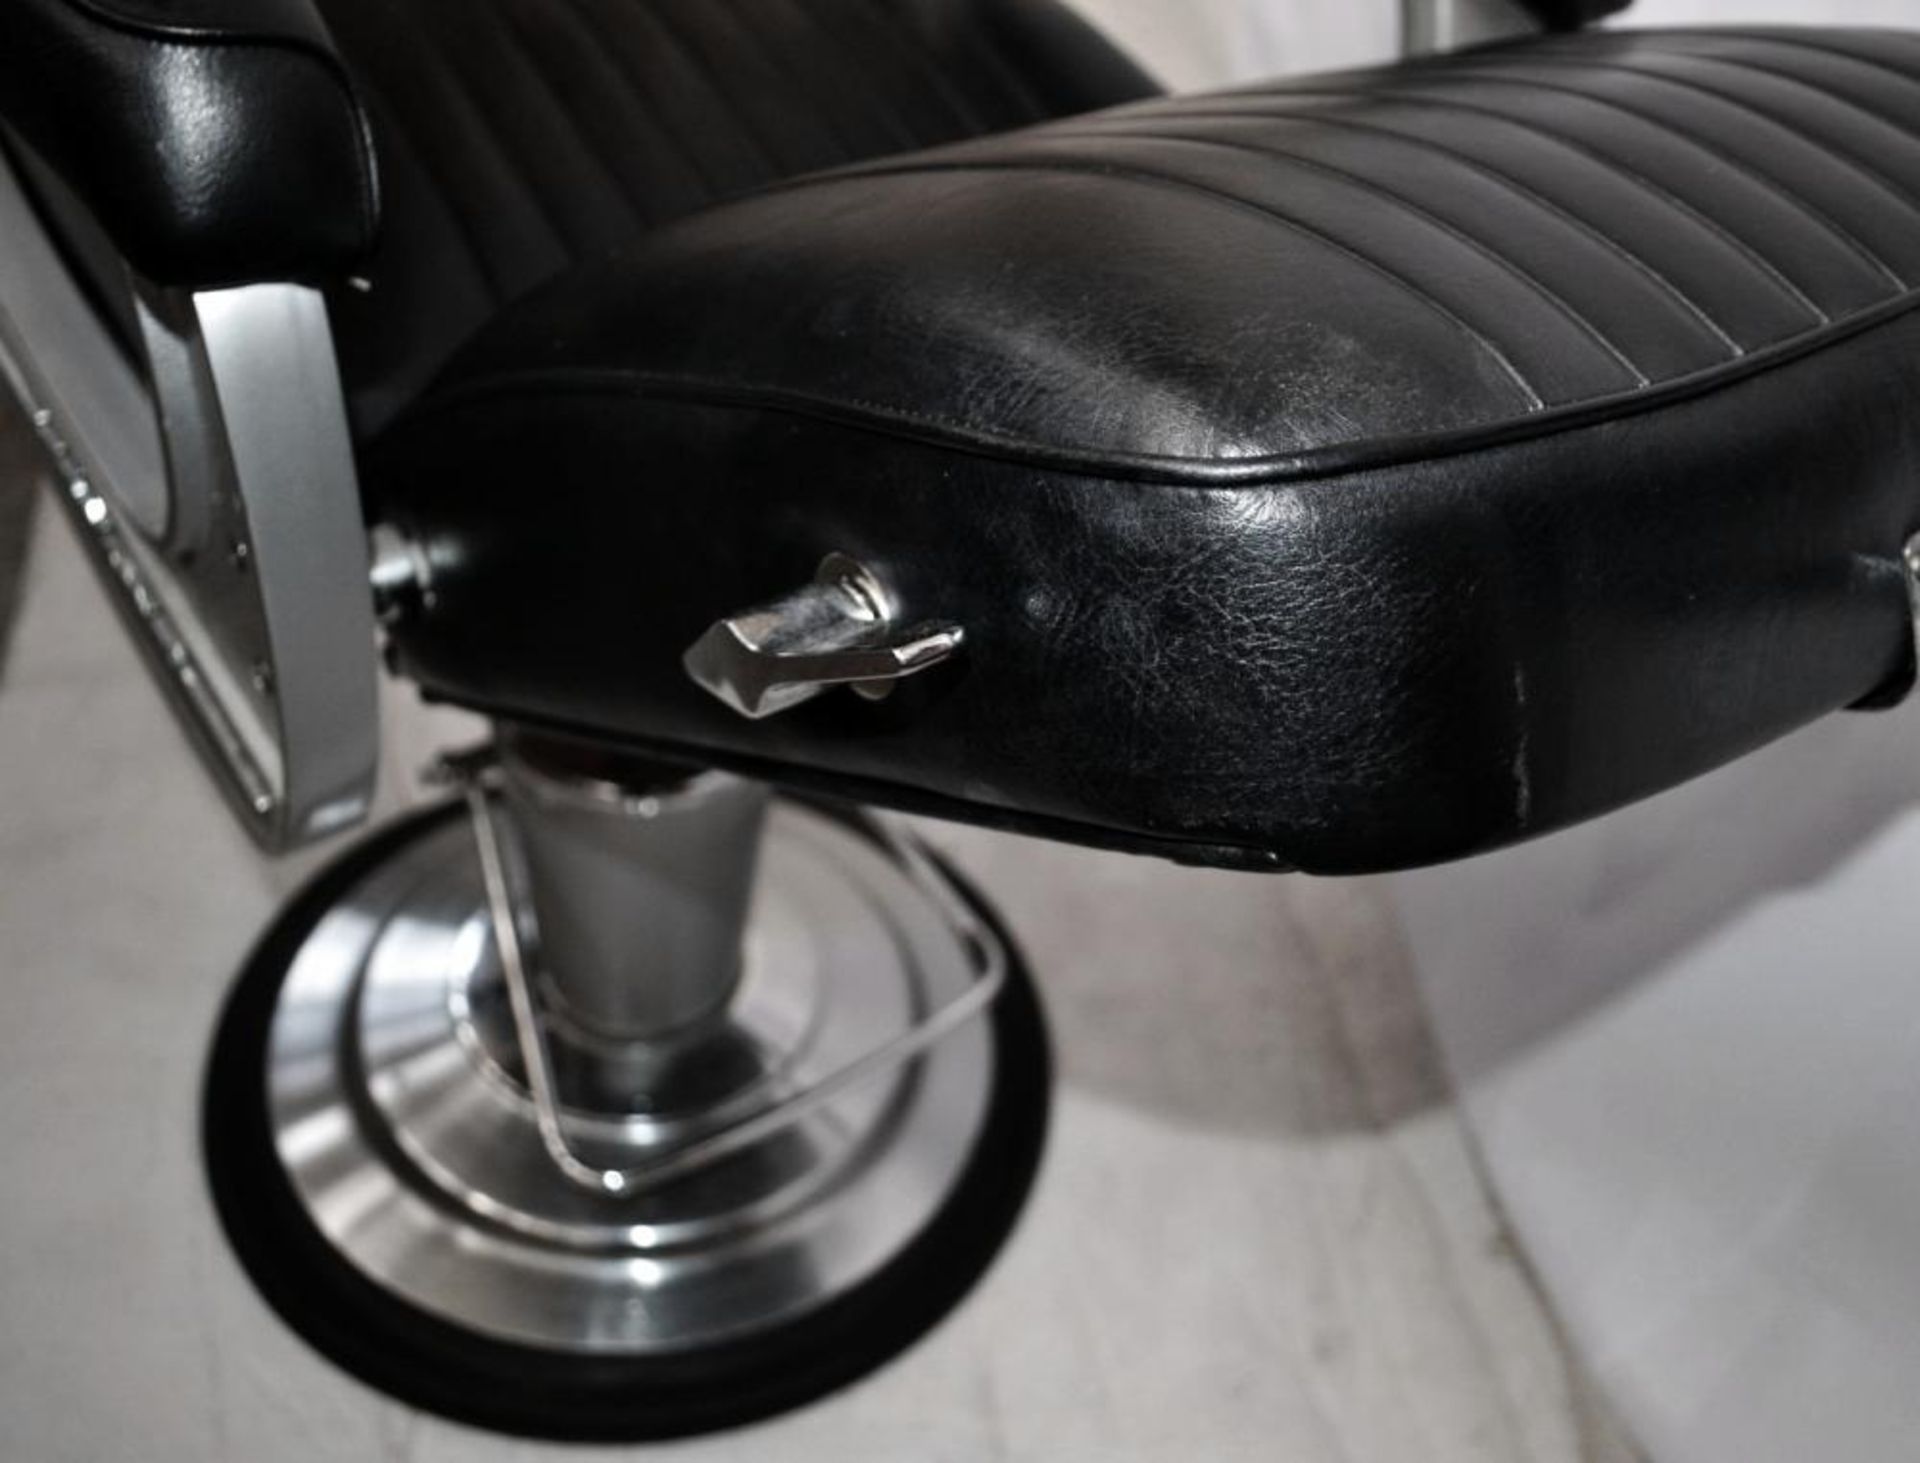 1 x Takara BELMONT "Apollo 2" Barbers Chair - Recently Taken From A Premier West-End Male Grooming S - Image 6 of 19